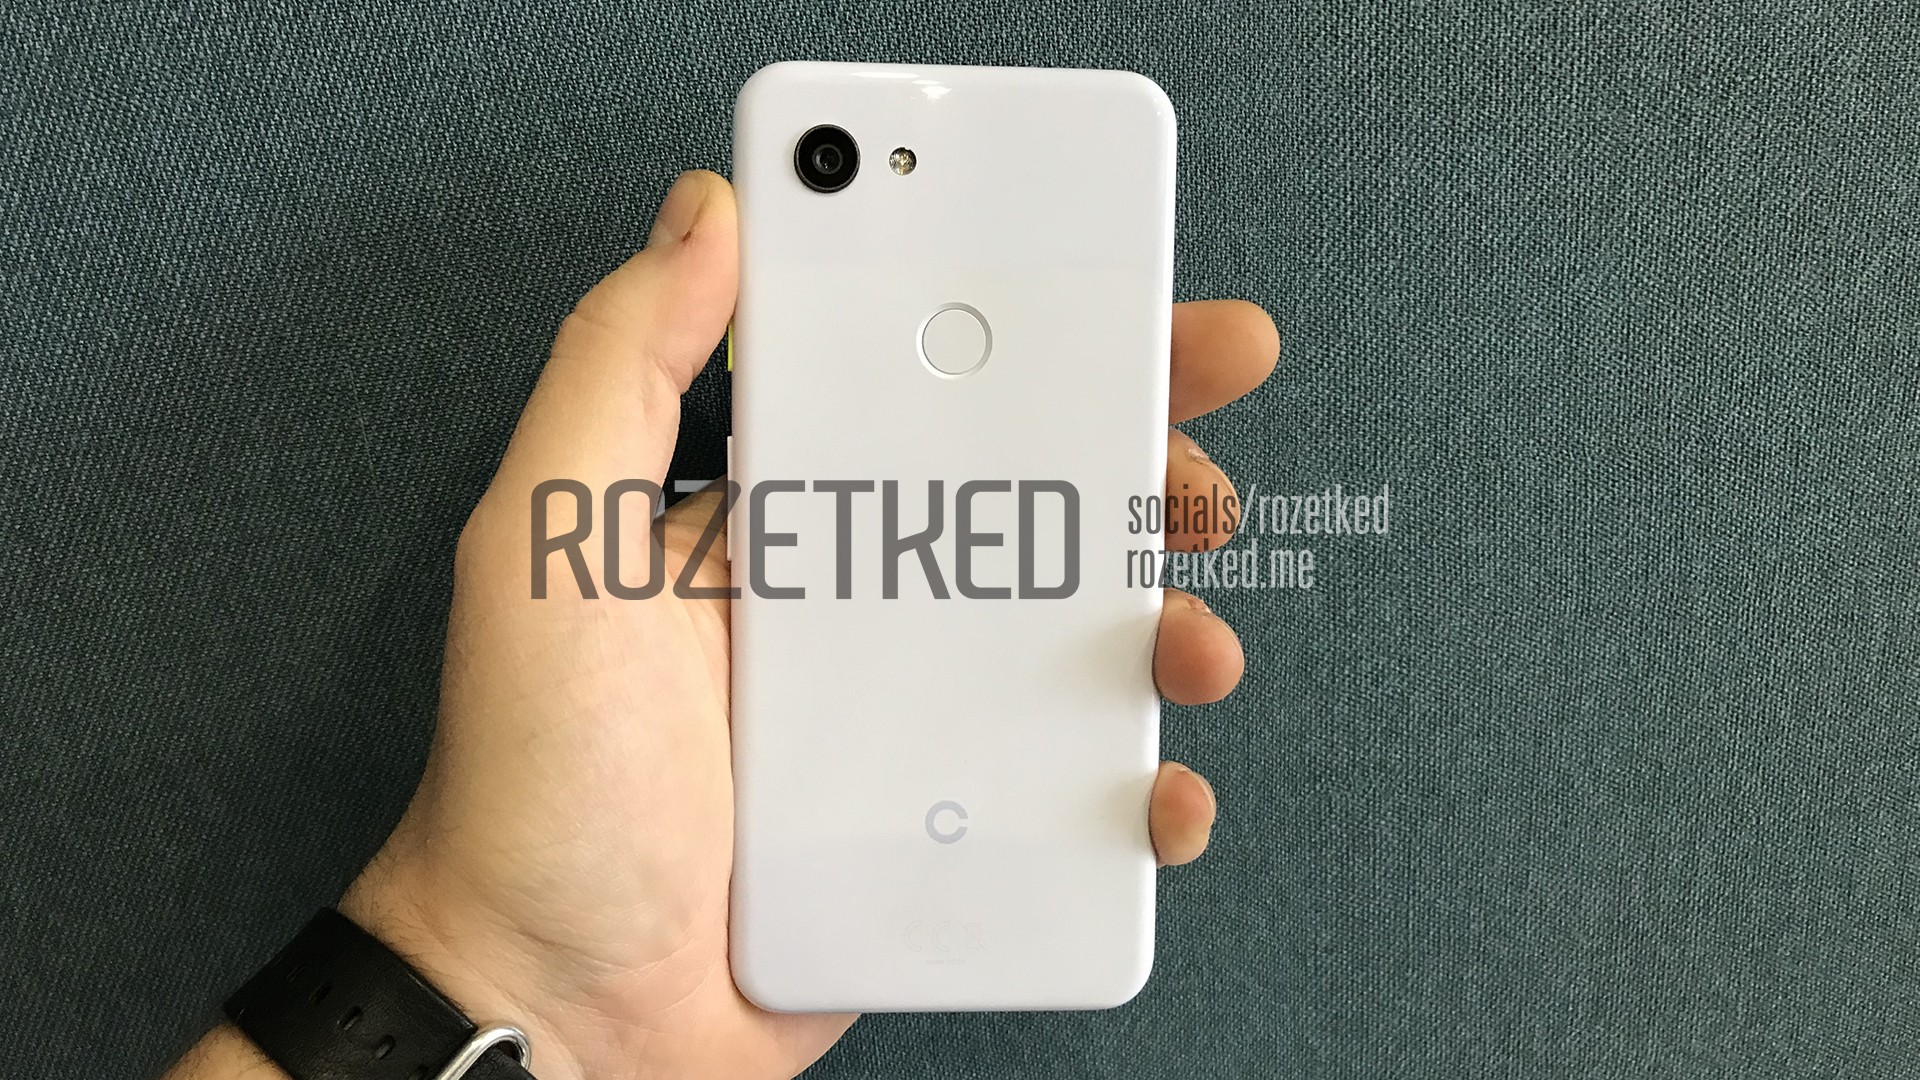 Sample Photos Leakes from the leaked Pixel 3 Lite 5